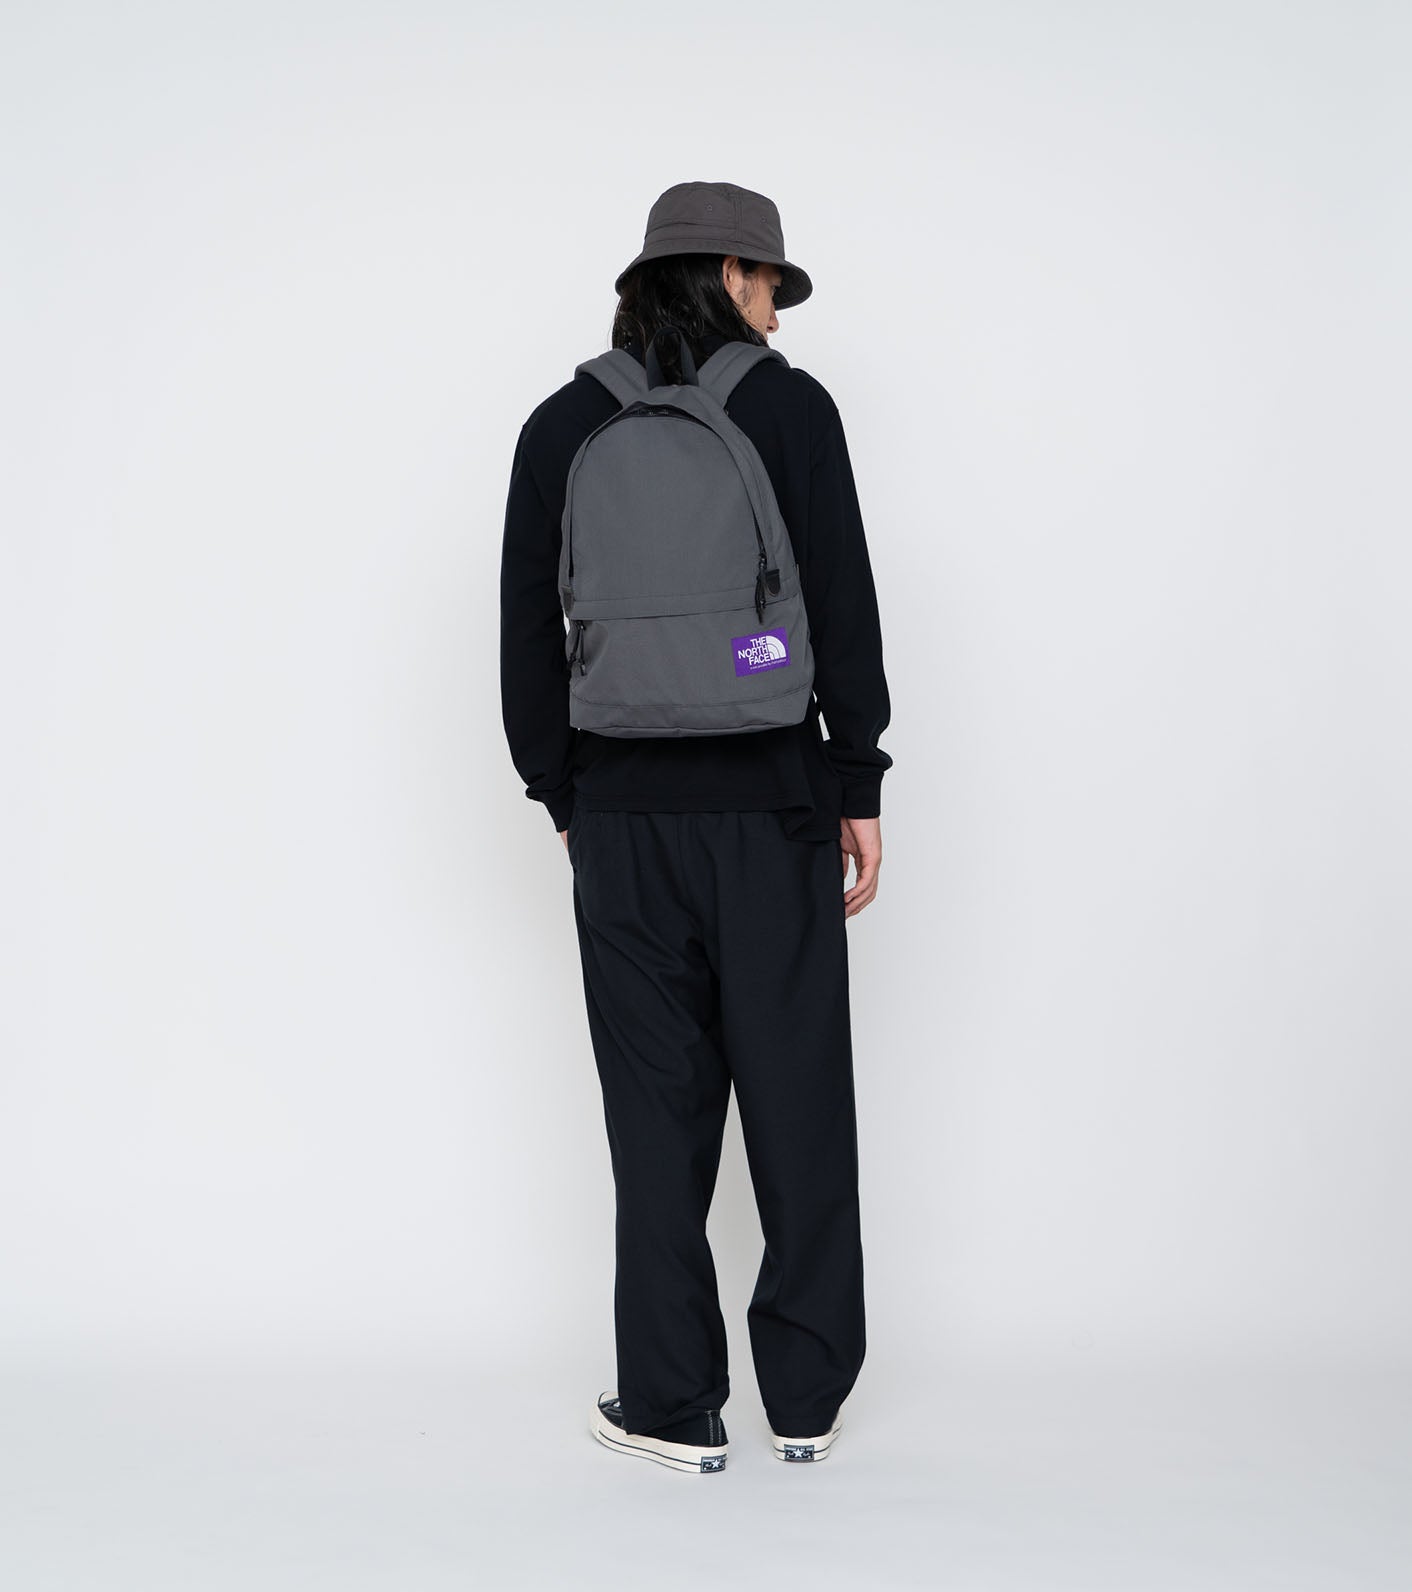 THE NORTH FACE PURPLE LABEL Field Day Pack